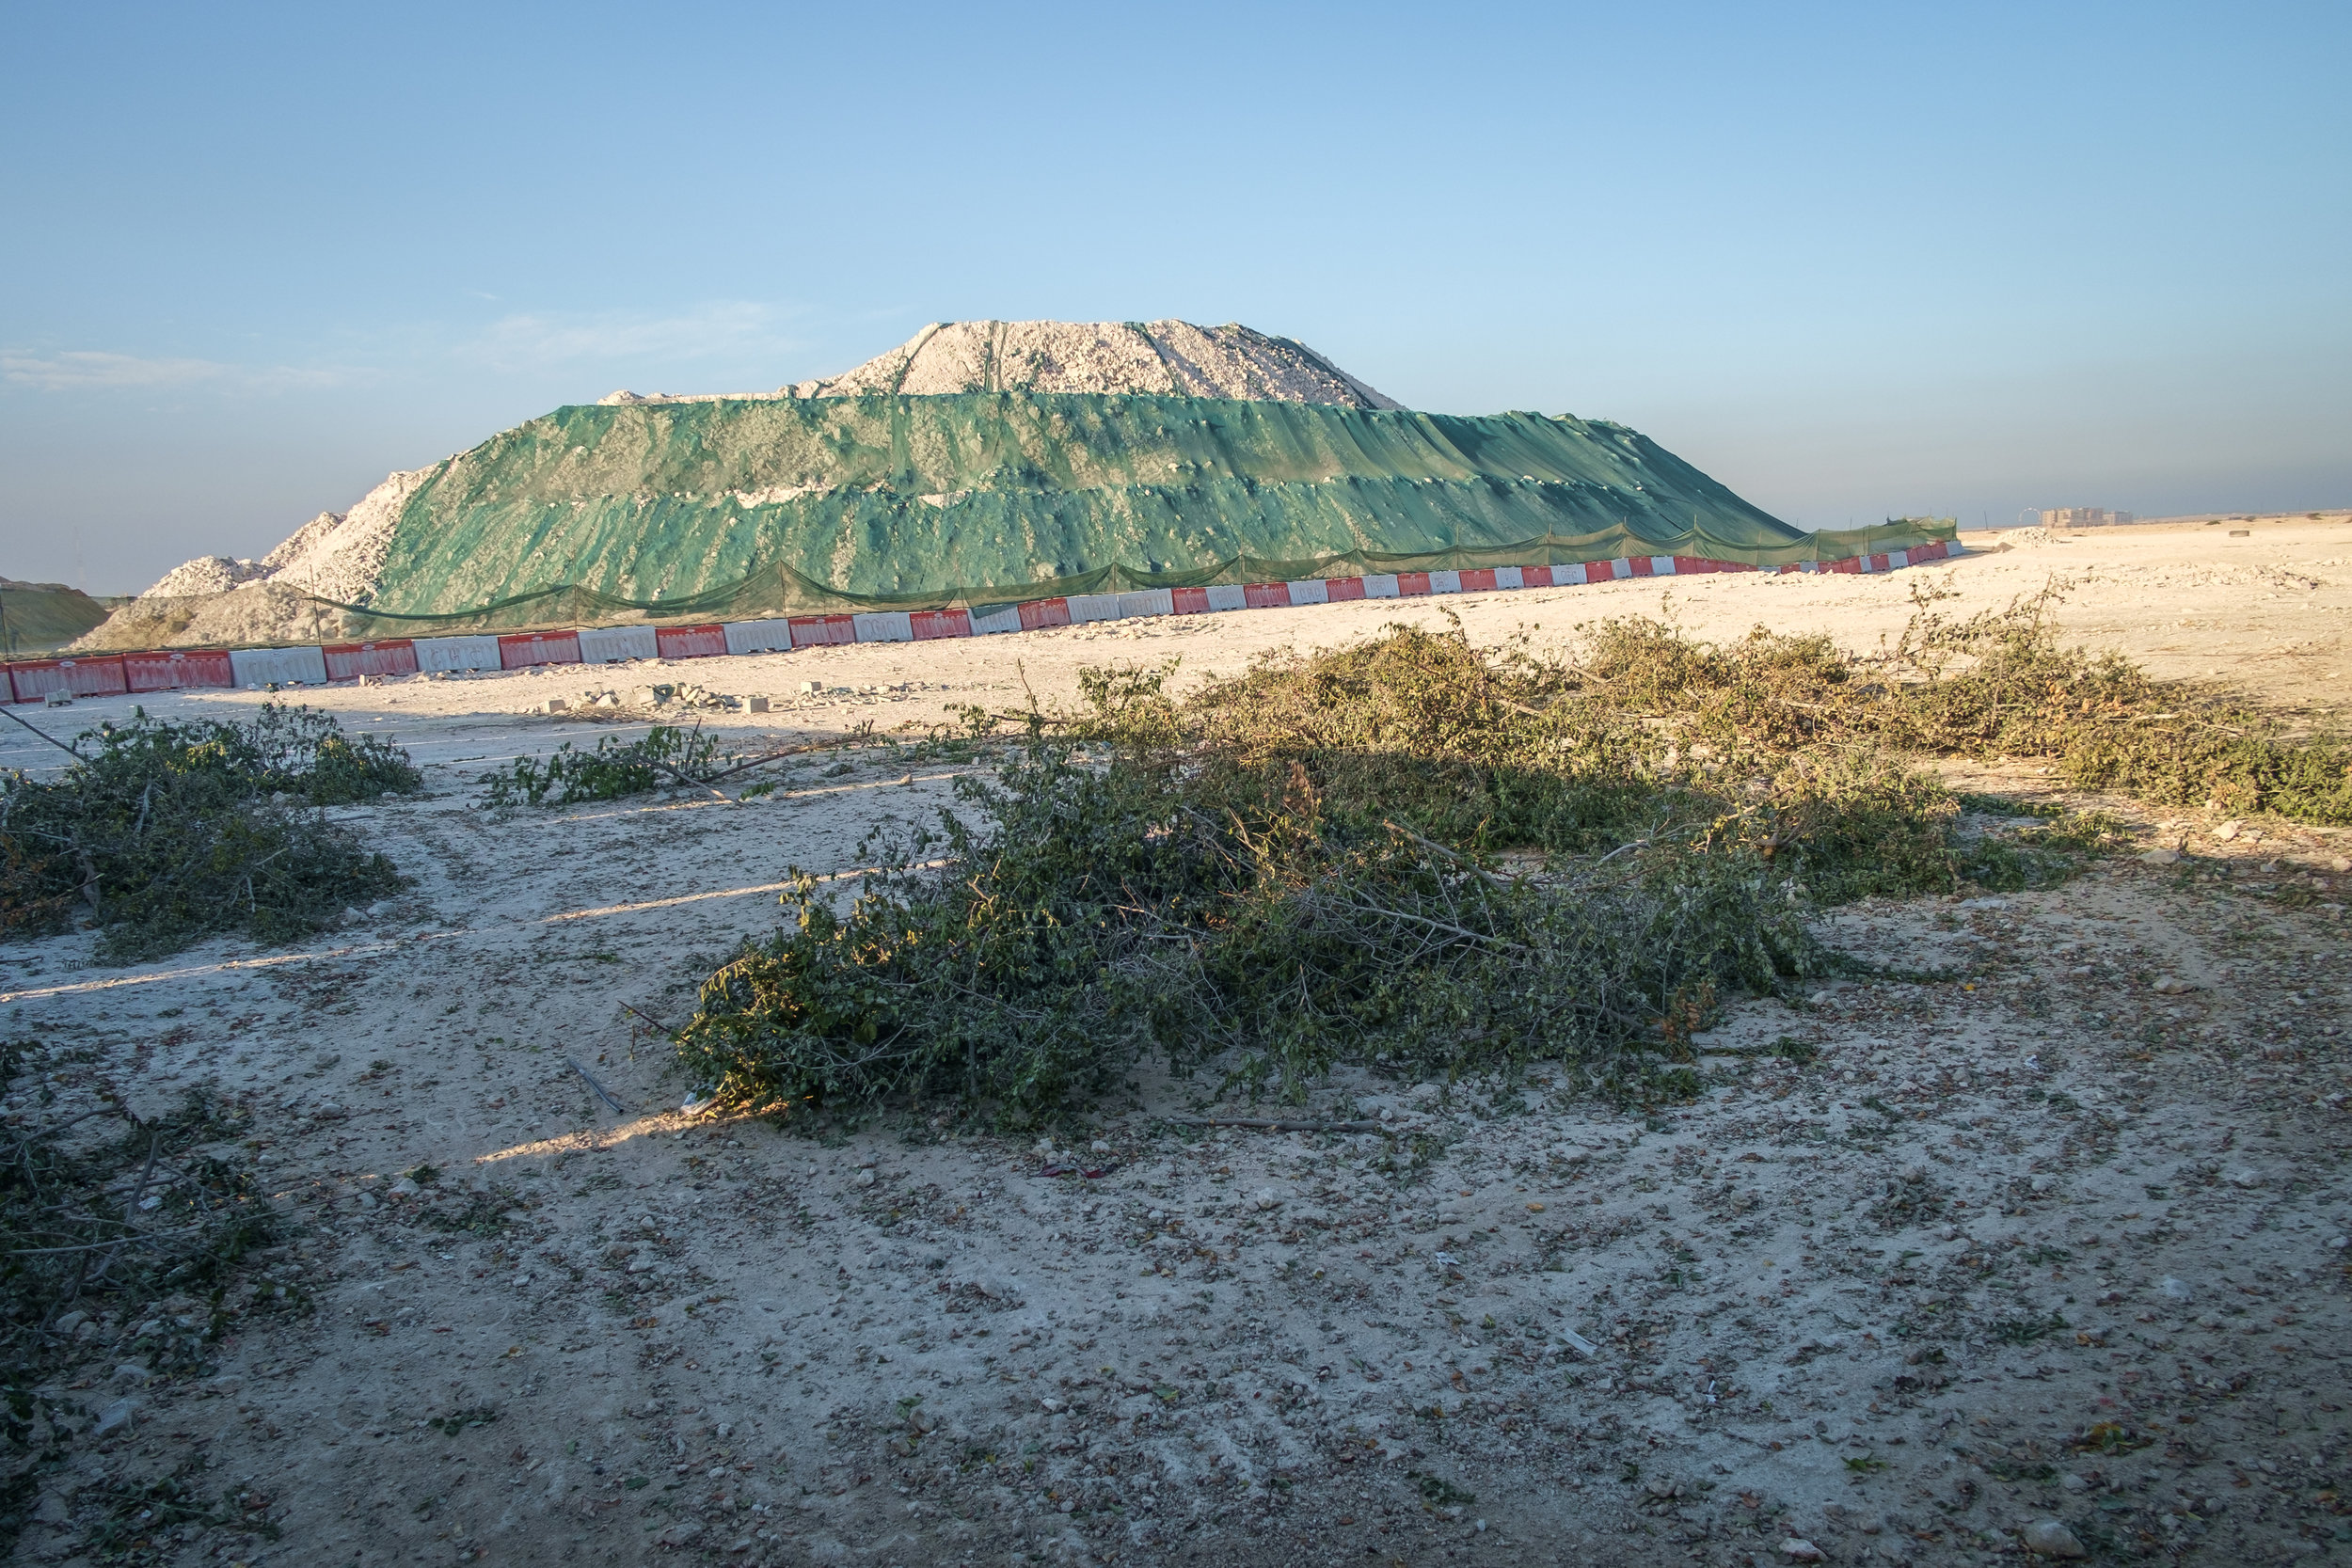  A massive mound of dirt and rock, echoing a half-built pyramid, is seen at a construction site just north of Doha.  